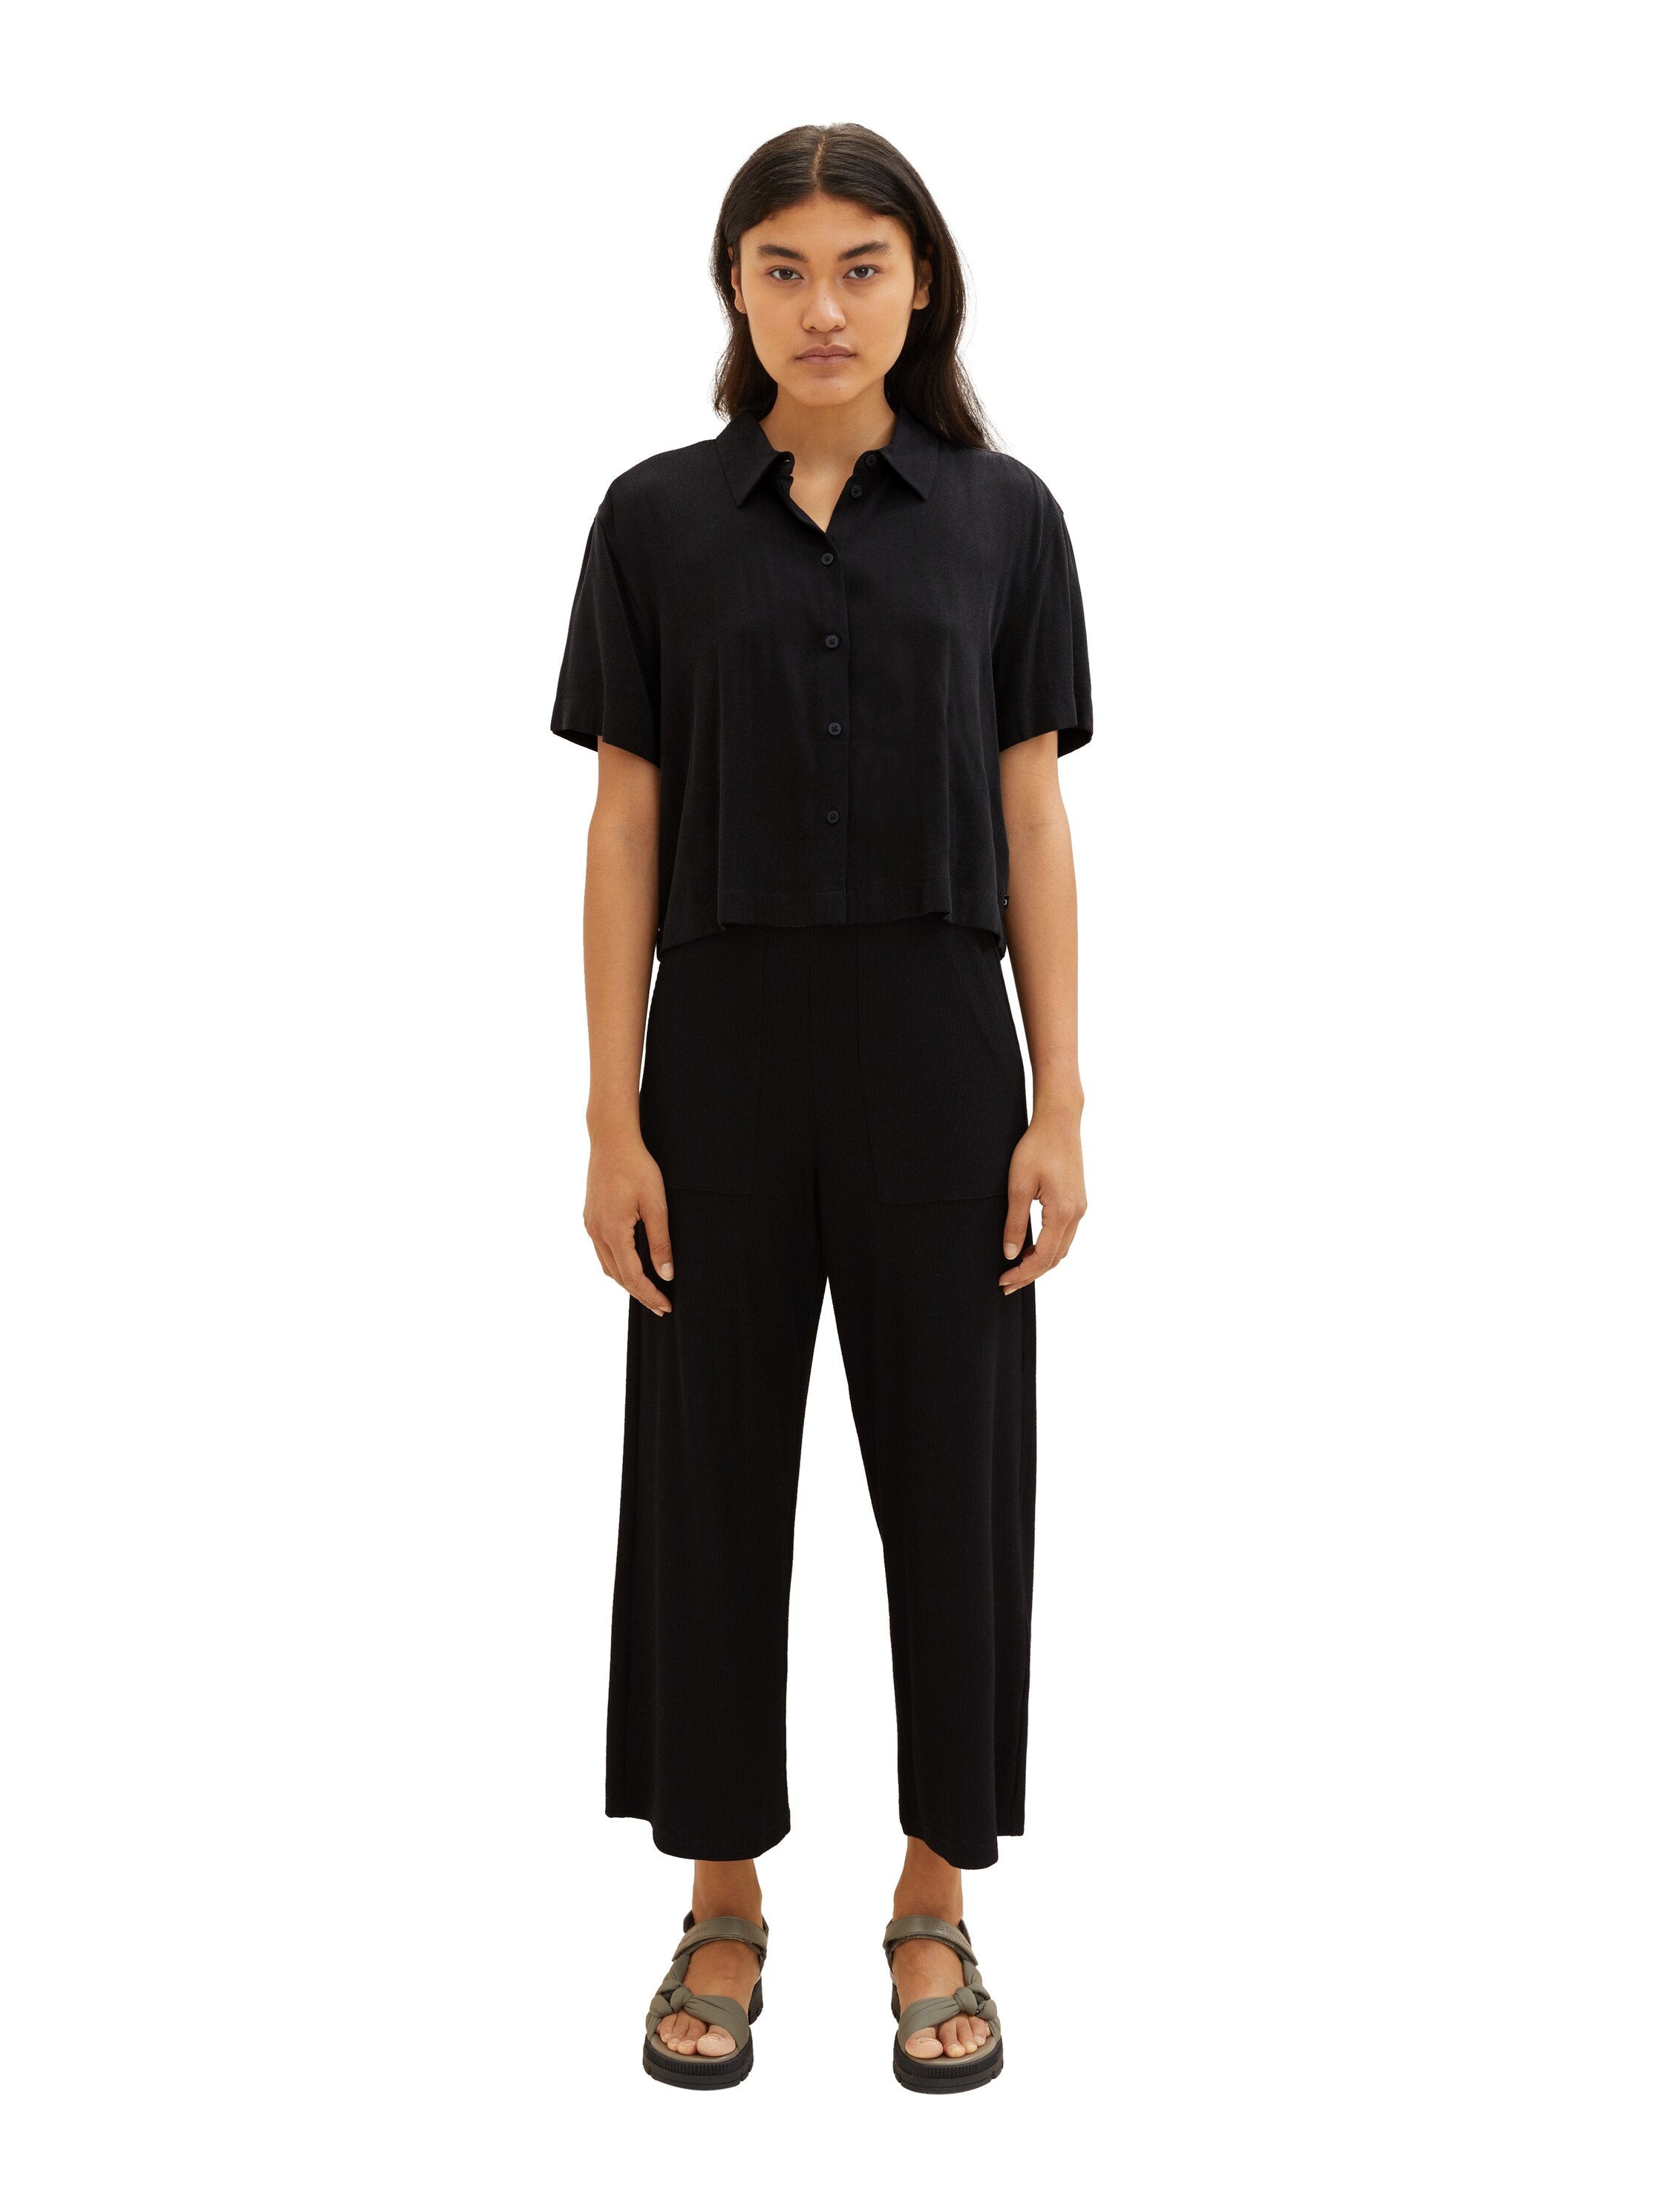 Cropped Slip On Trousers With Pockets_1038220_14482_07